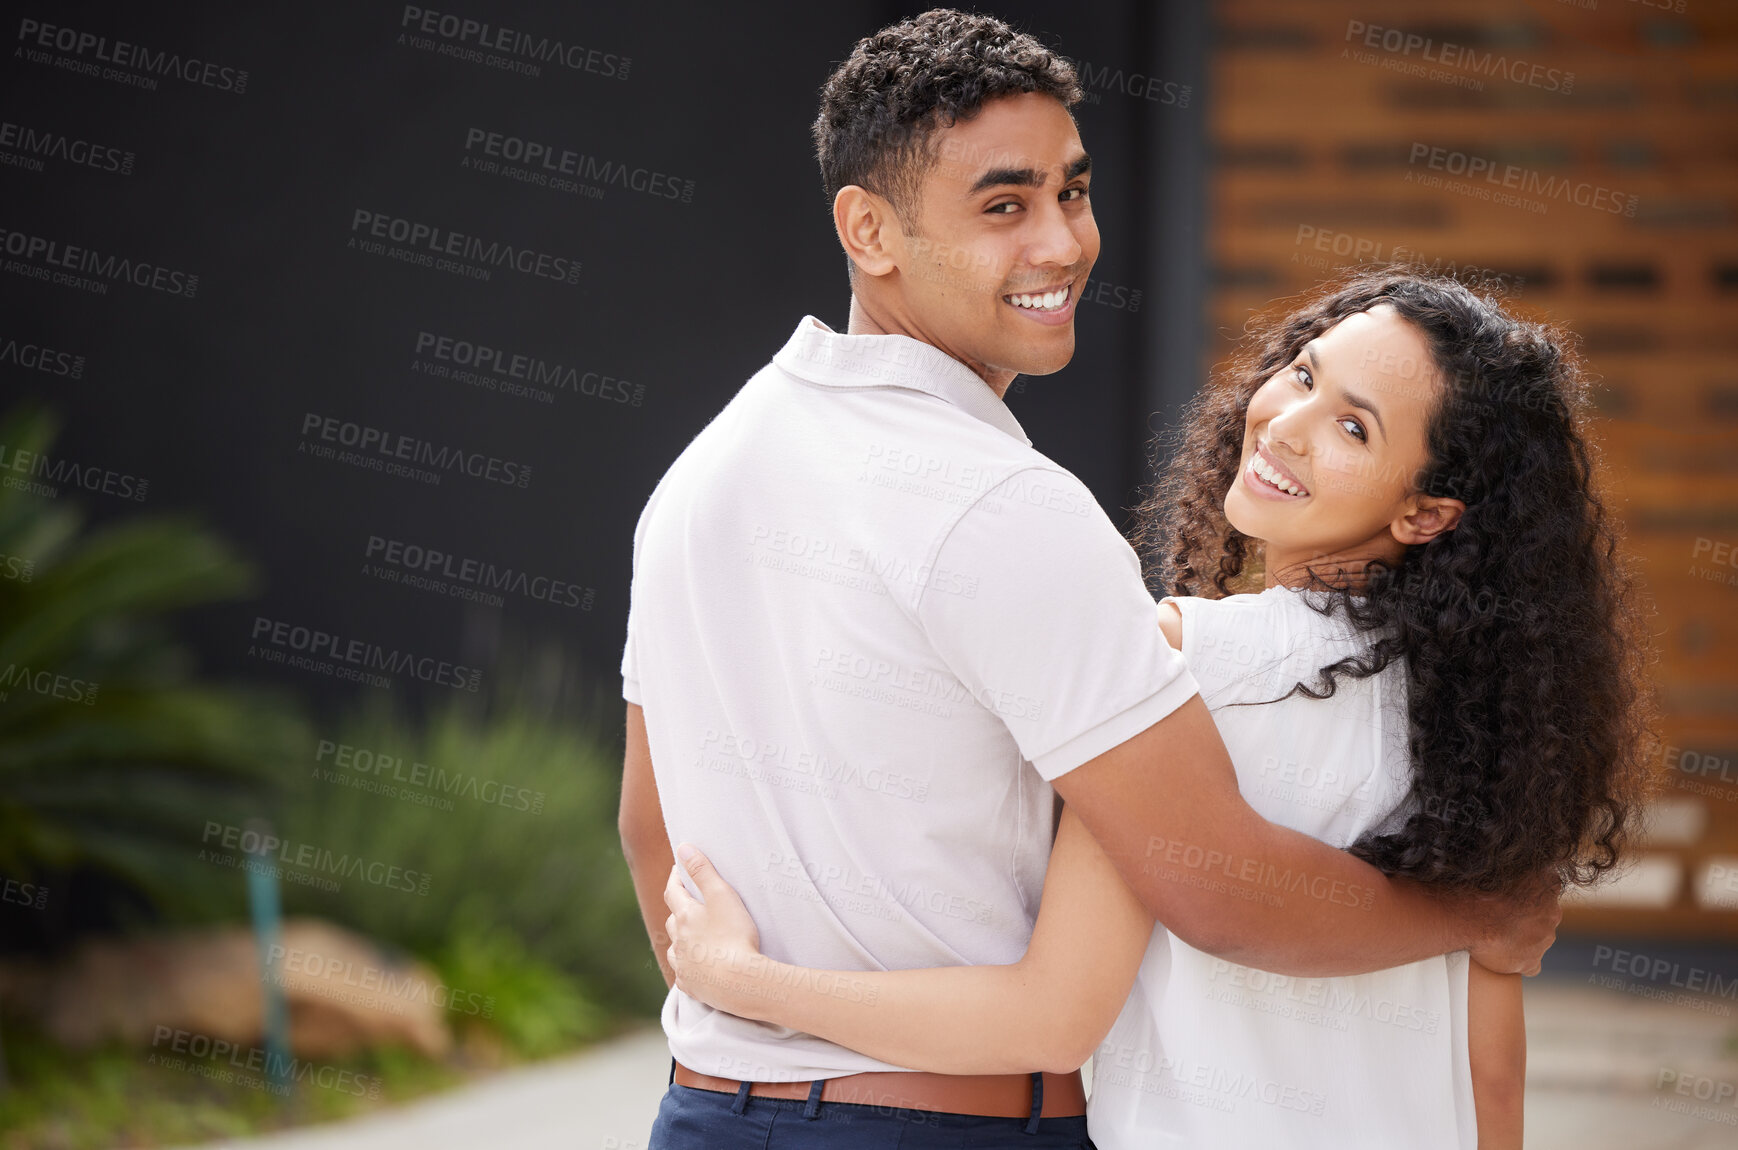 Buy stock photo Portrait, love and couple happy in front of new home or house hug as they stand on driveway with a smile. Real estate, investment in future and property with man and woman spending time together.

